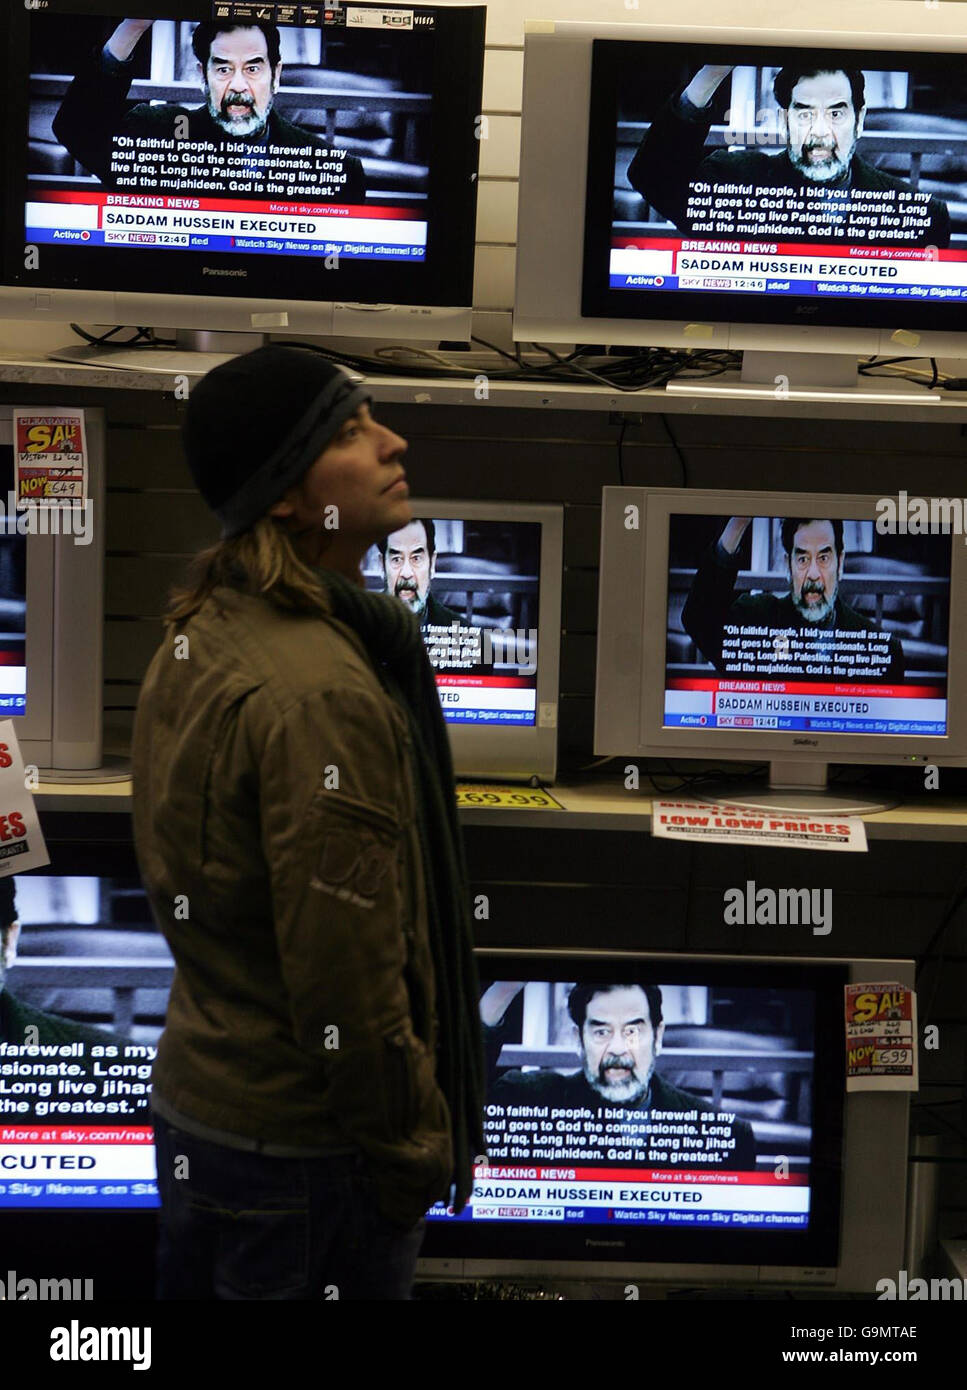 A man watches a television in an electrical store in central London, as broadcasters report on the reaction to the execution of Saddam Hussein that occurred in Iraq earlier today. Stock Photo